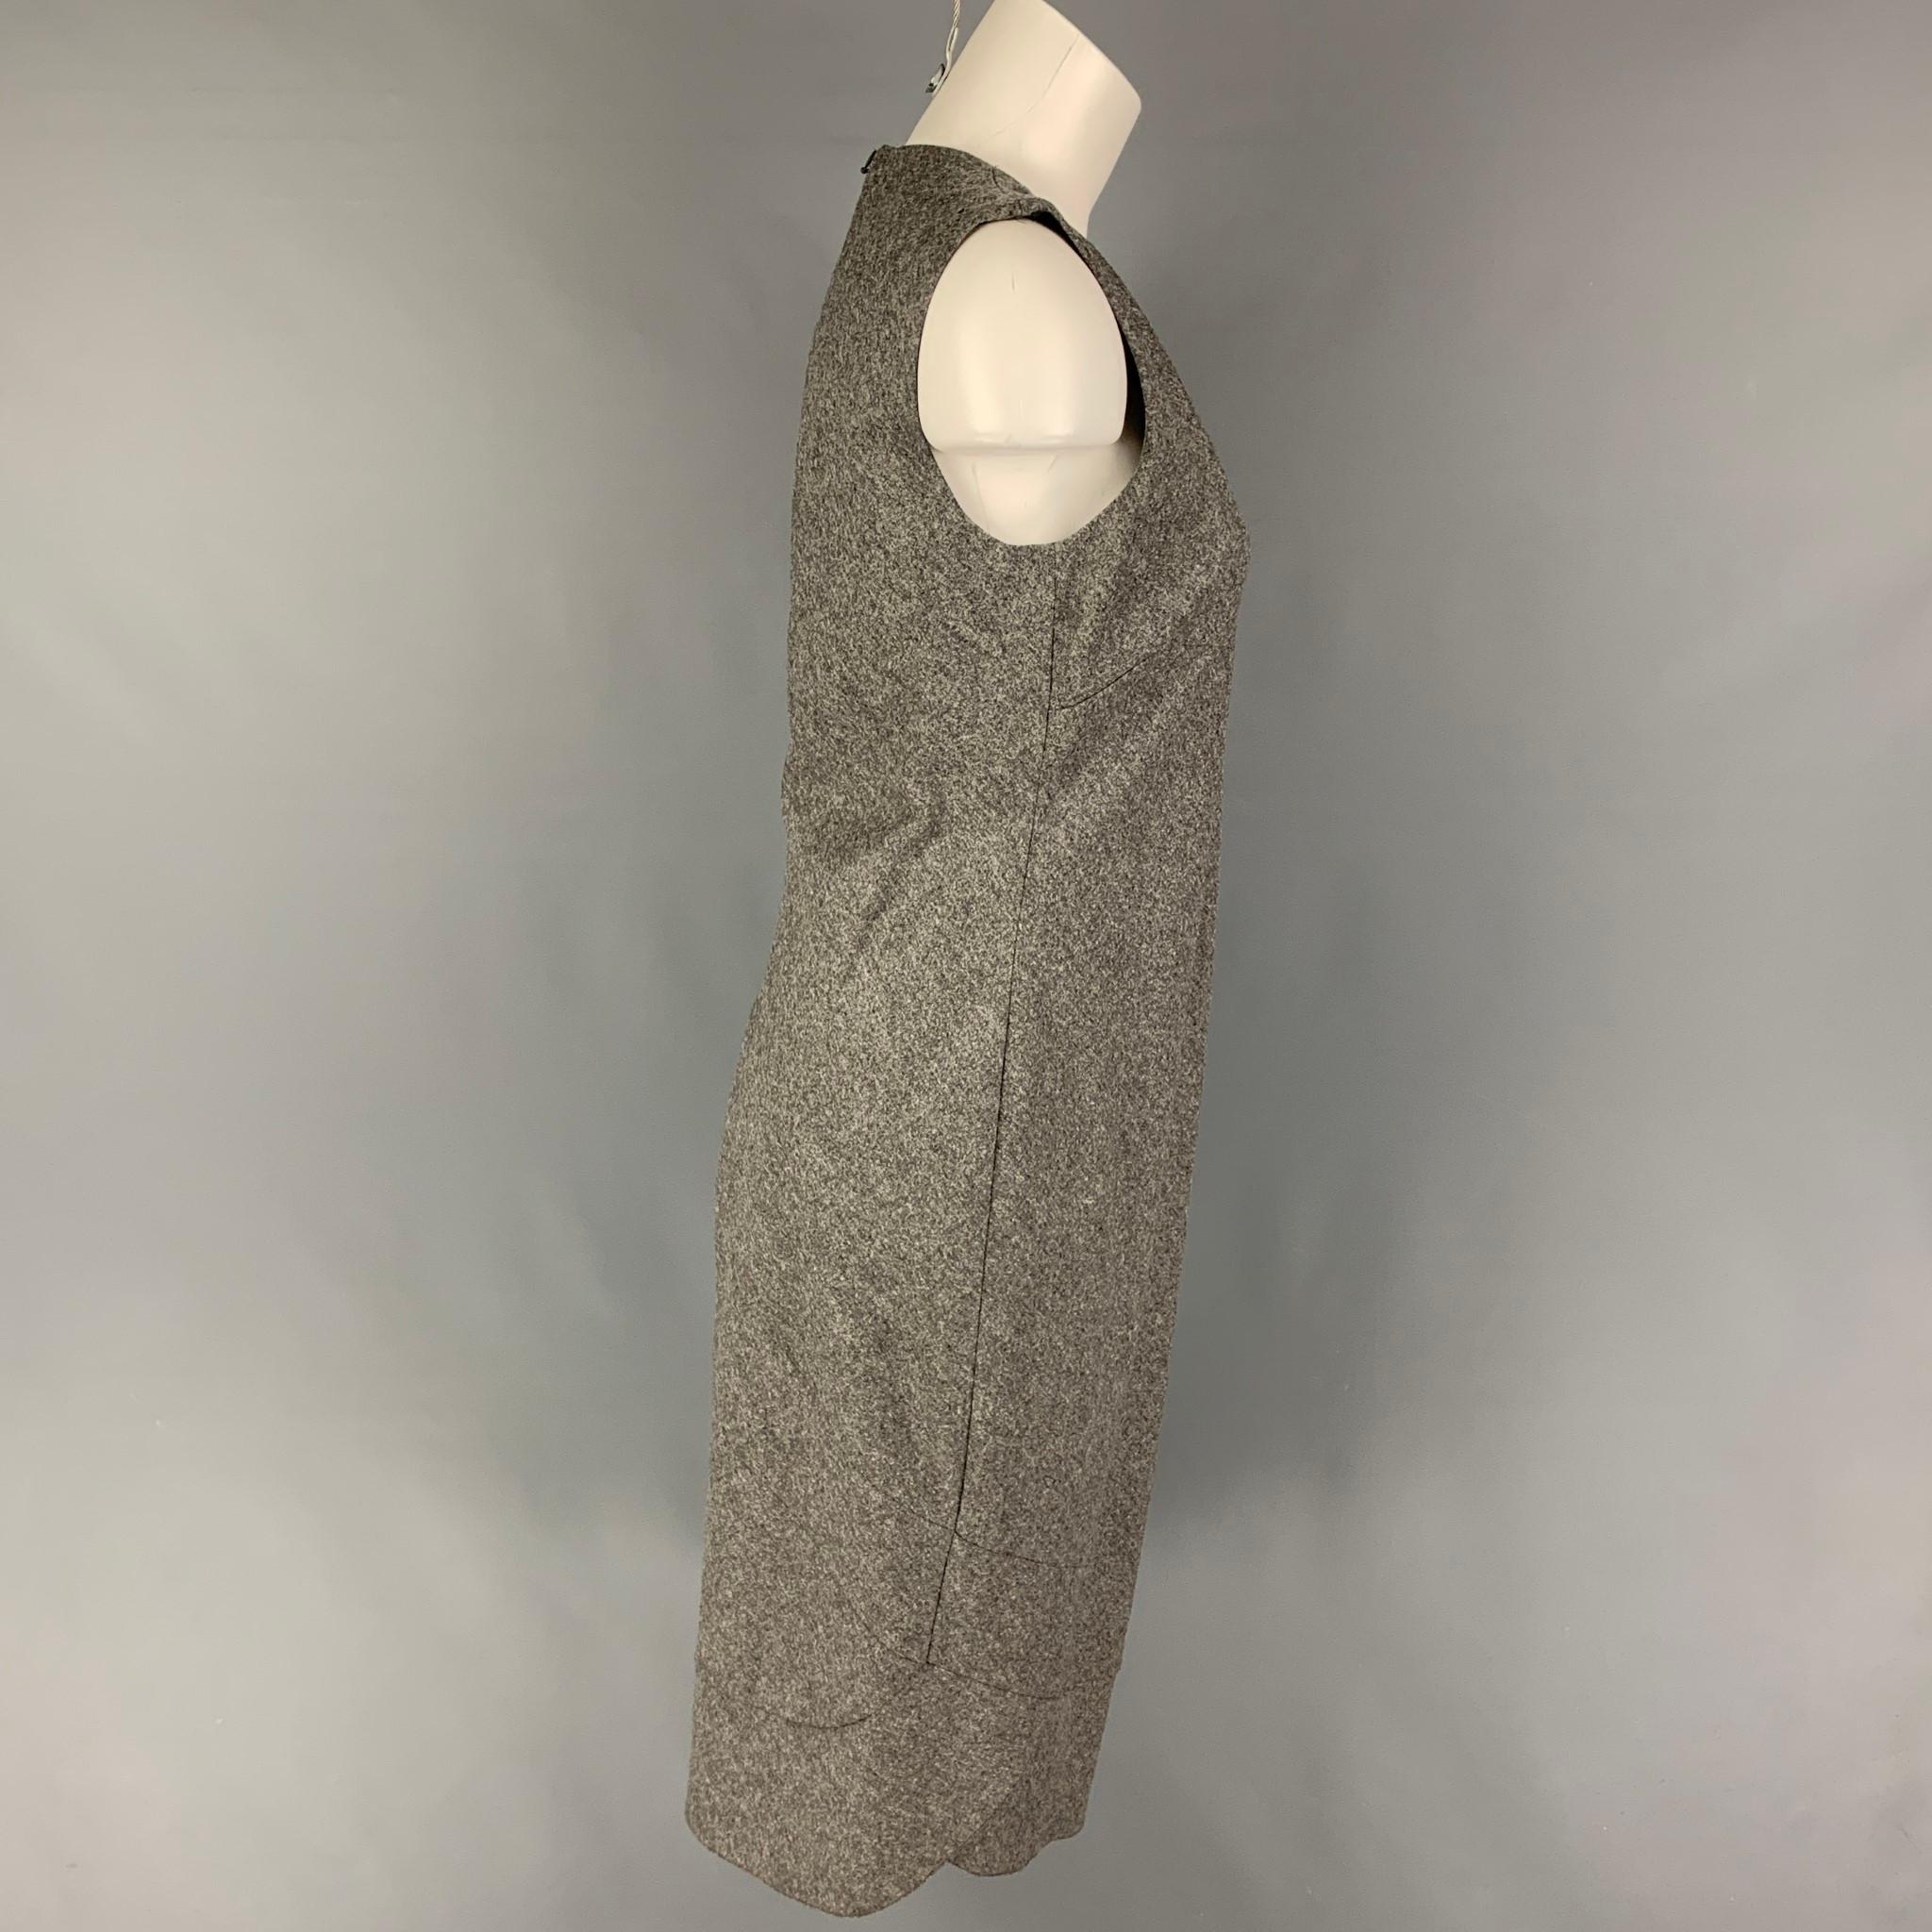 RICHARD TYLER dress comes in a grey virgin wool / cashmere featuring a v-neck, sleeveless, and a back zip up closure. 

Very Good Pre-Owned Condition.
Marked: 44

Measurements:

Shoulder: 14.5 in.
Bust: 34 in.
Waist: 30 in.
Hip: 36 in.
Length: 42.5